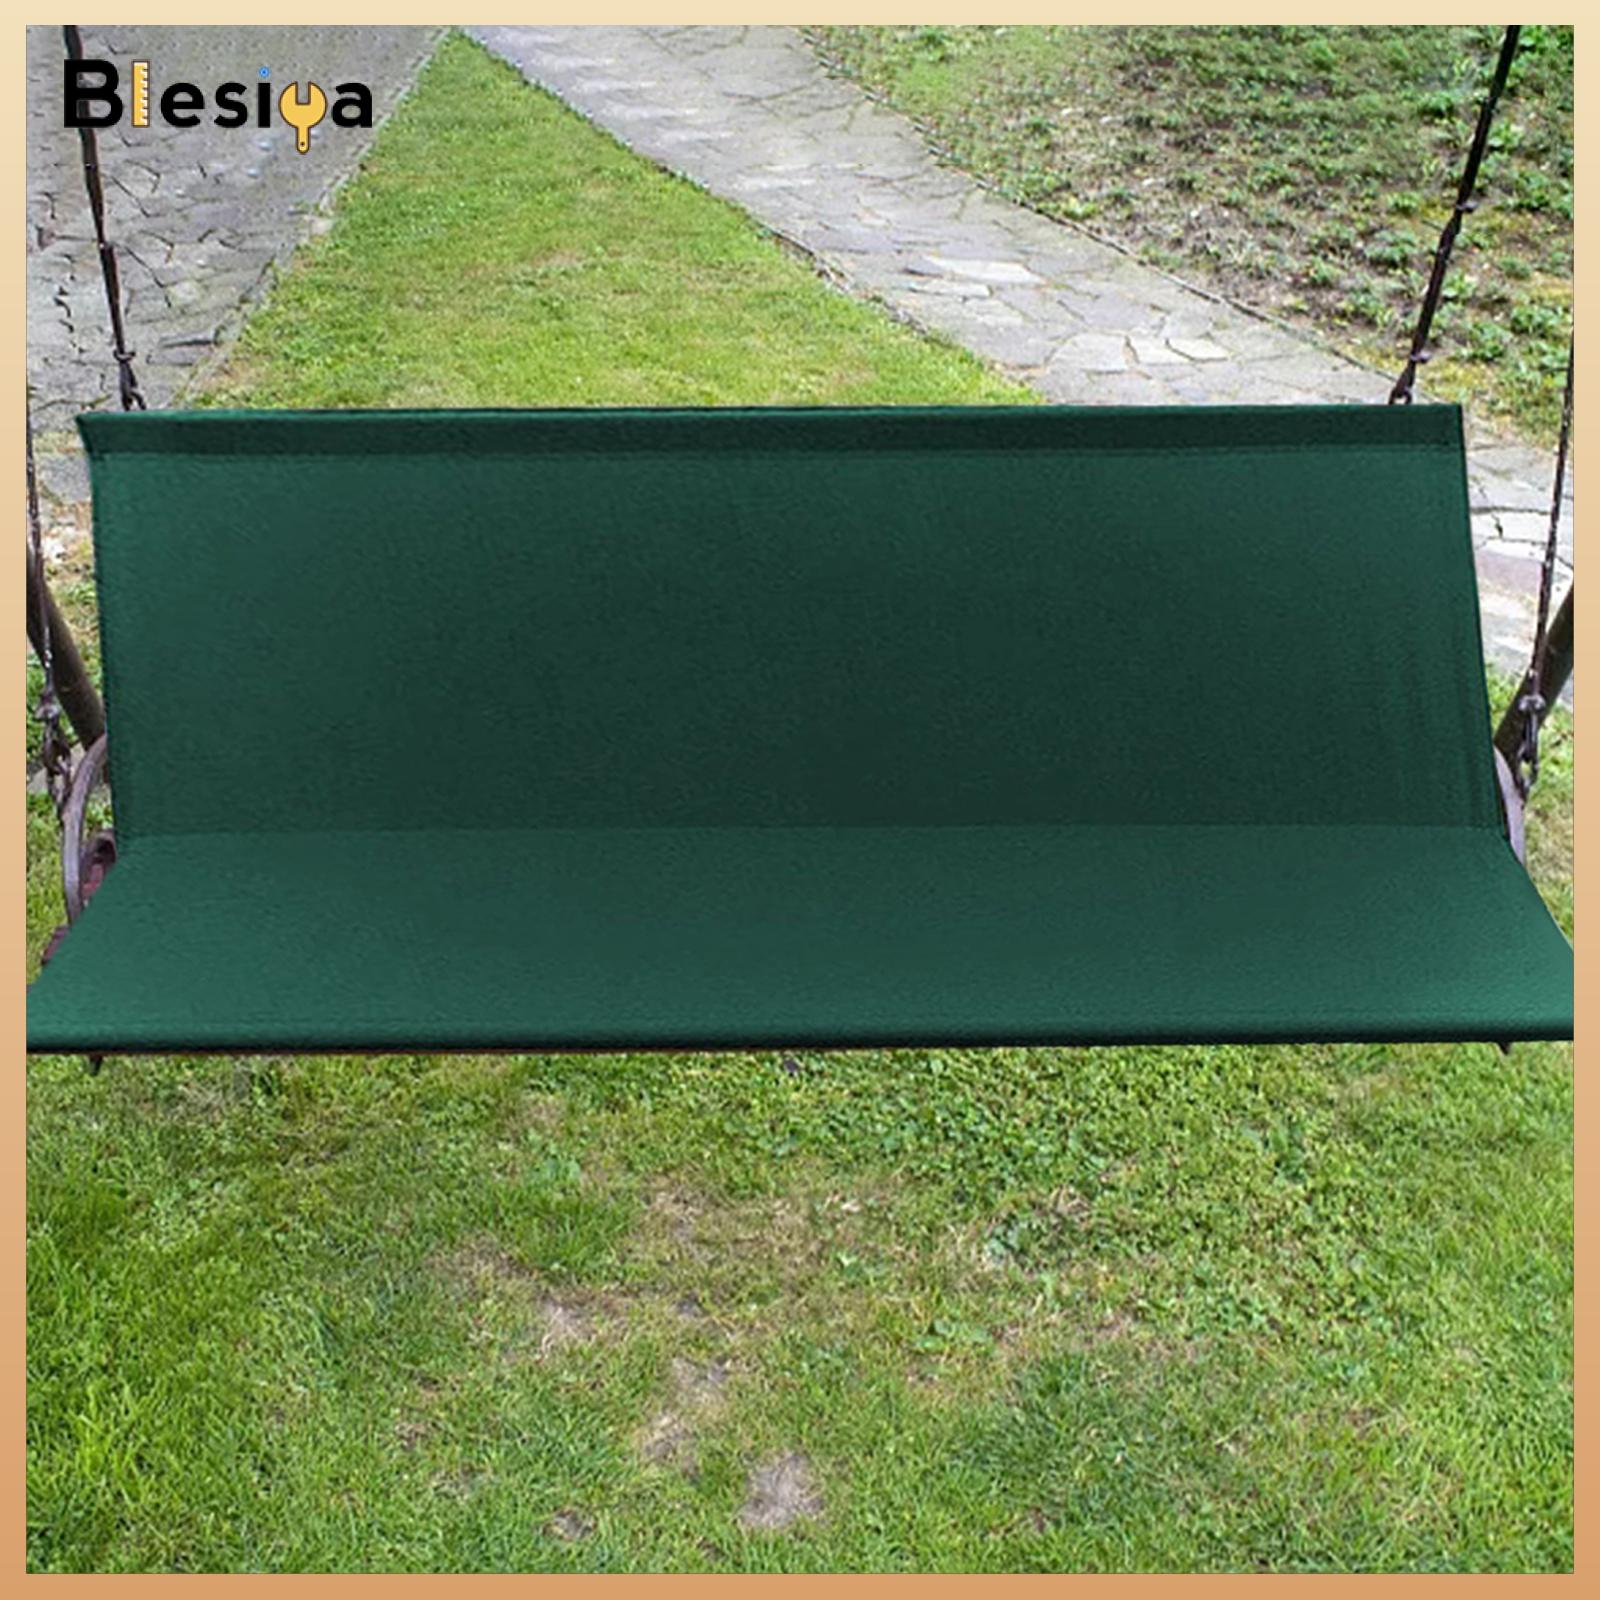 Blesiya Swing Seat Cover Swing Seat Cover for Swing Chair Garden Outdoor